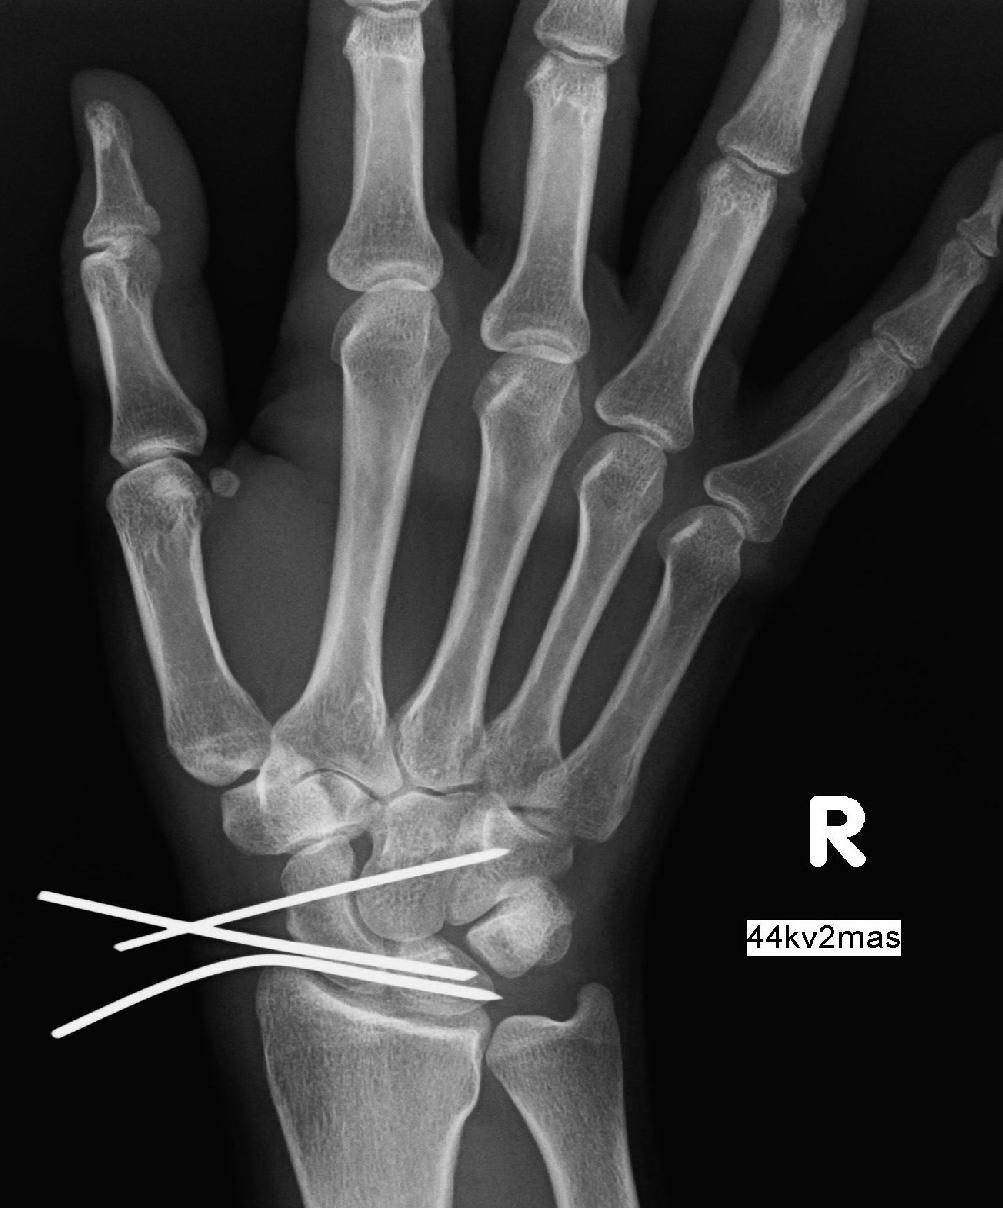 ligament, not allowing for distal manipulation by means of the probe.